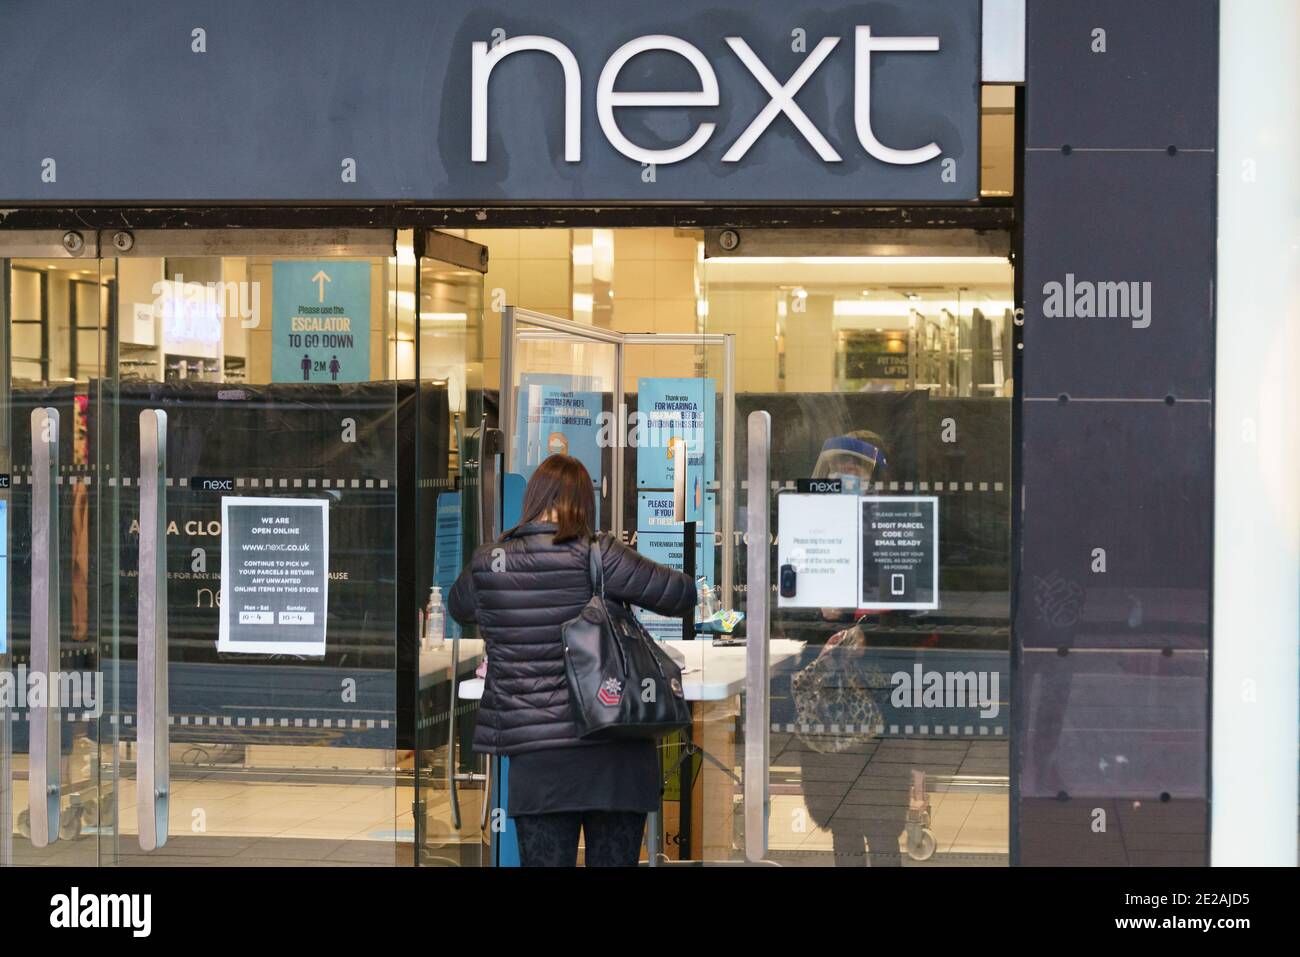 Edinburgh, Scotland, UK. 13 January 2021. Shops in Scotland now generally prohibited from offering Click and Collect service from front doors with some exceptions depending on type of goods on sale. Pic; Next is still open for limited products such as babywear.  Iain Masterton/Alamy Live News Stock Photo